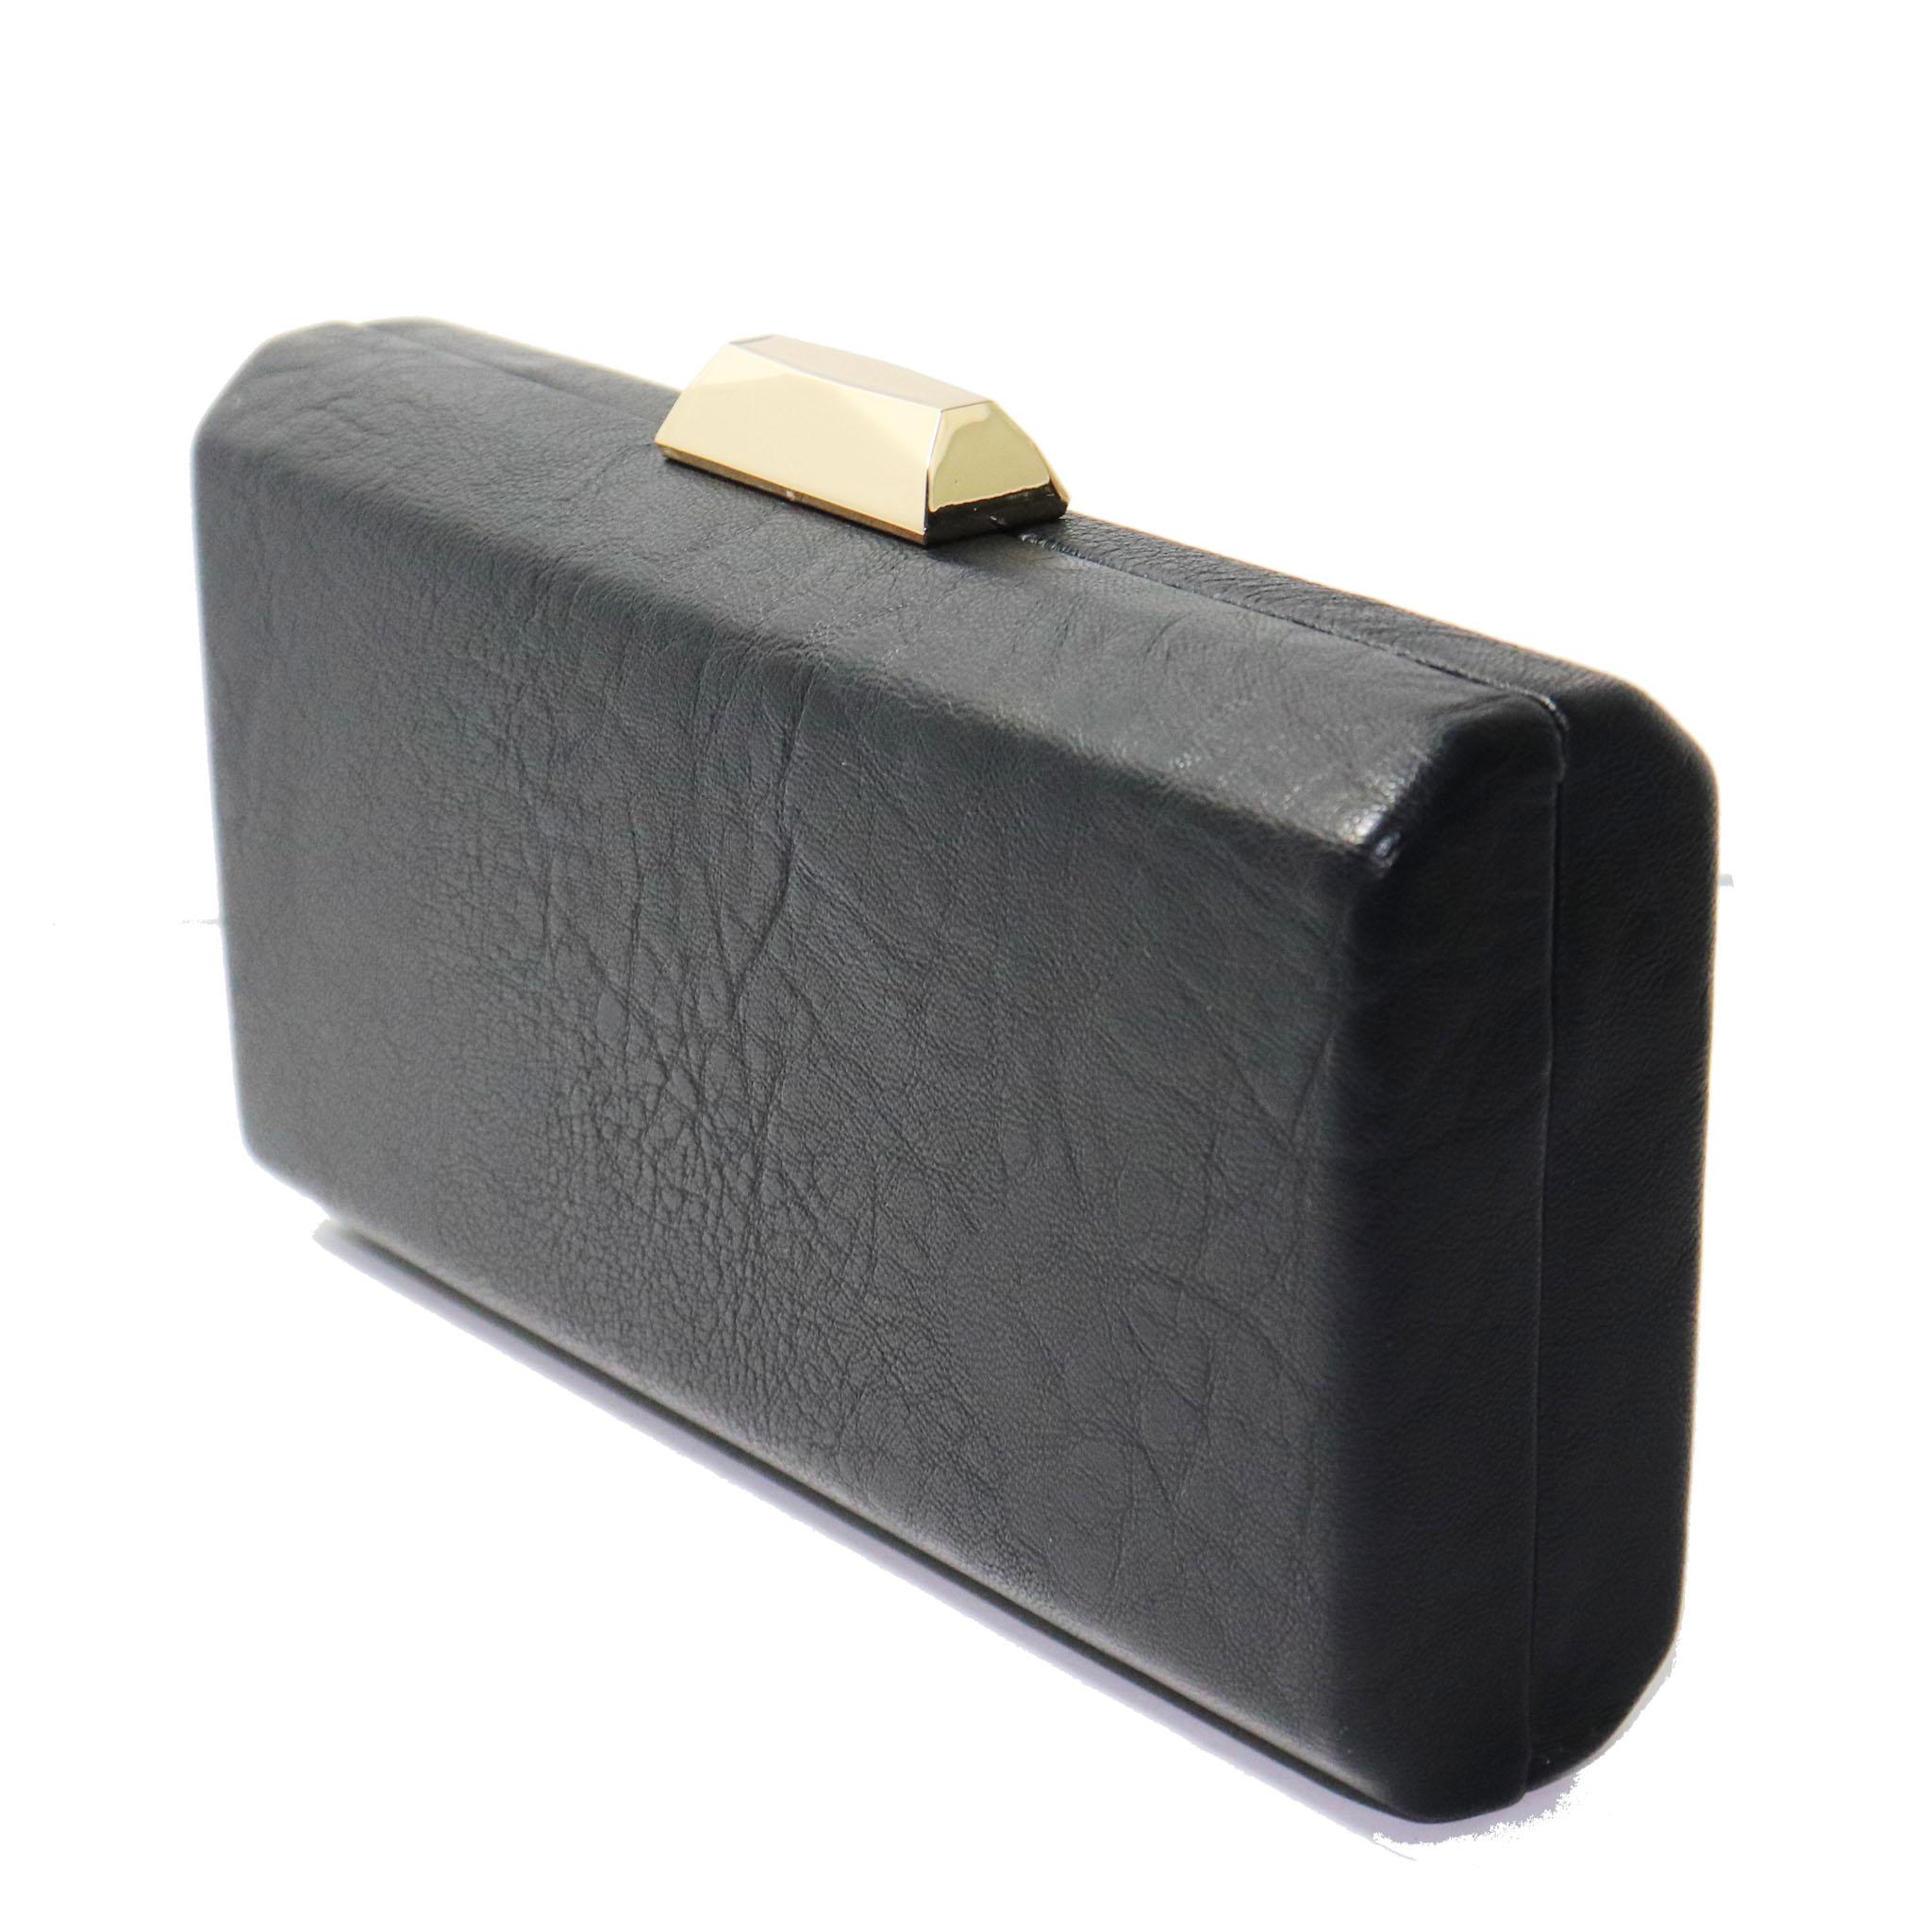 No Label: Black Leather Hard Shell Clutch with Gold Clasp and Long Chain



Measurements:

Length: 8.5 in.

Width: 2 in.

Height: 5.5 in.